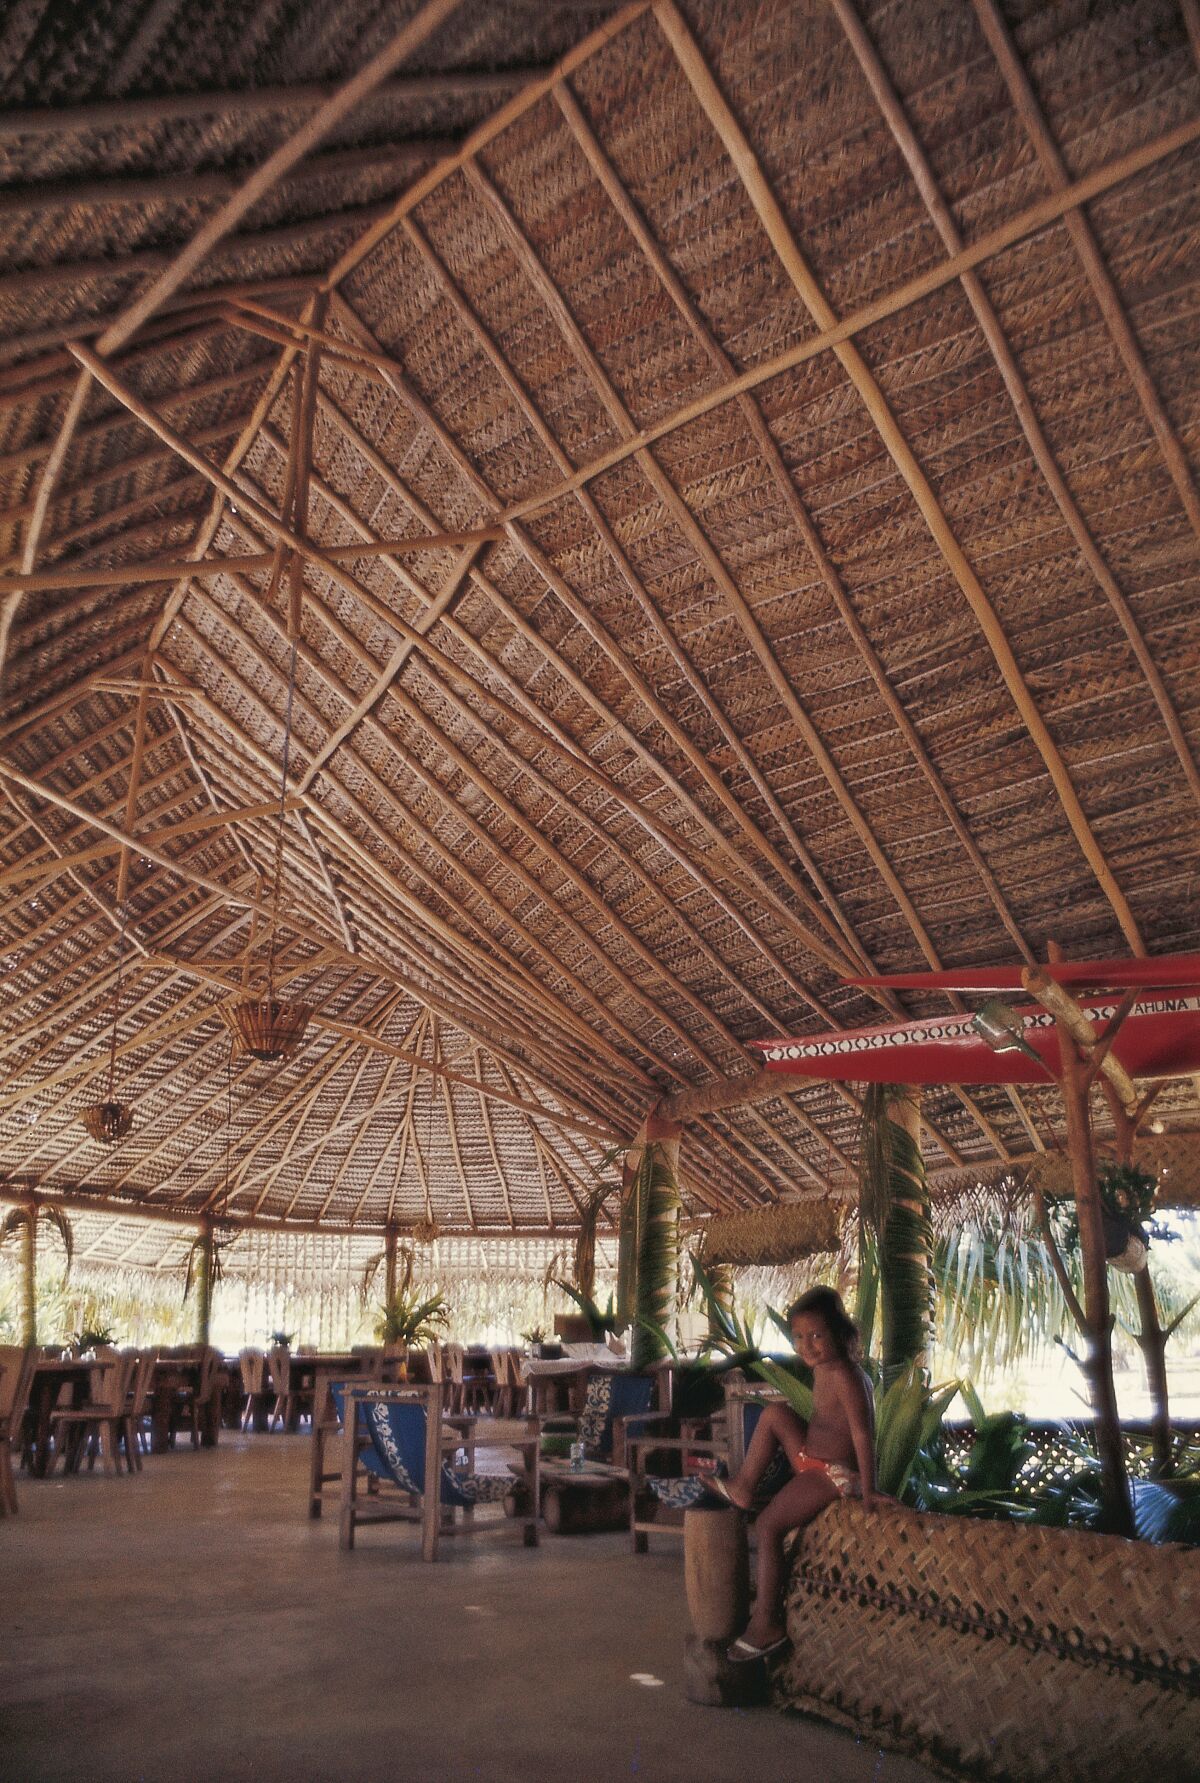 A child sits in a large open-air pavilion inspired by Polynesian architecture, made from bamboo and woven palm fronds.